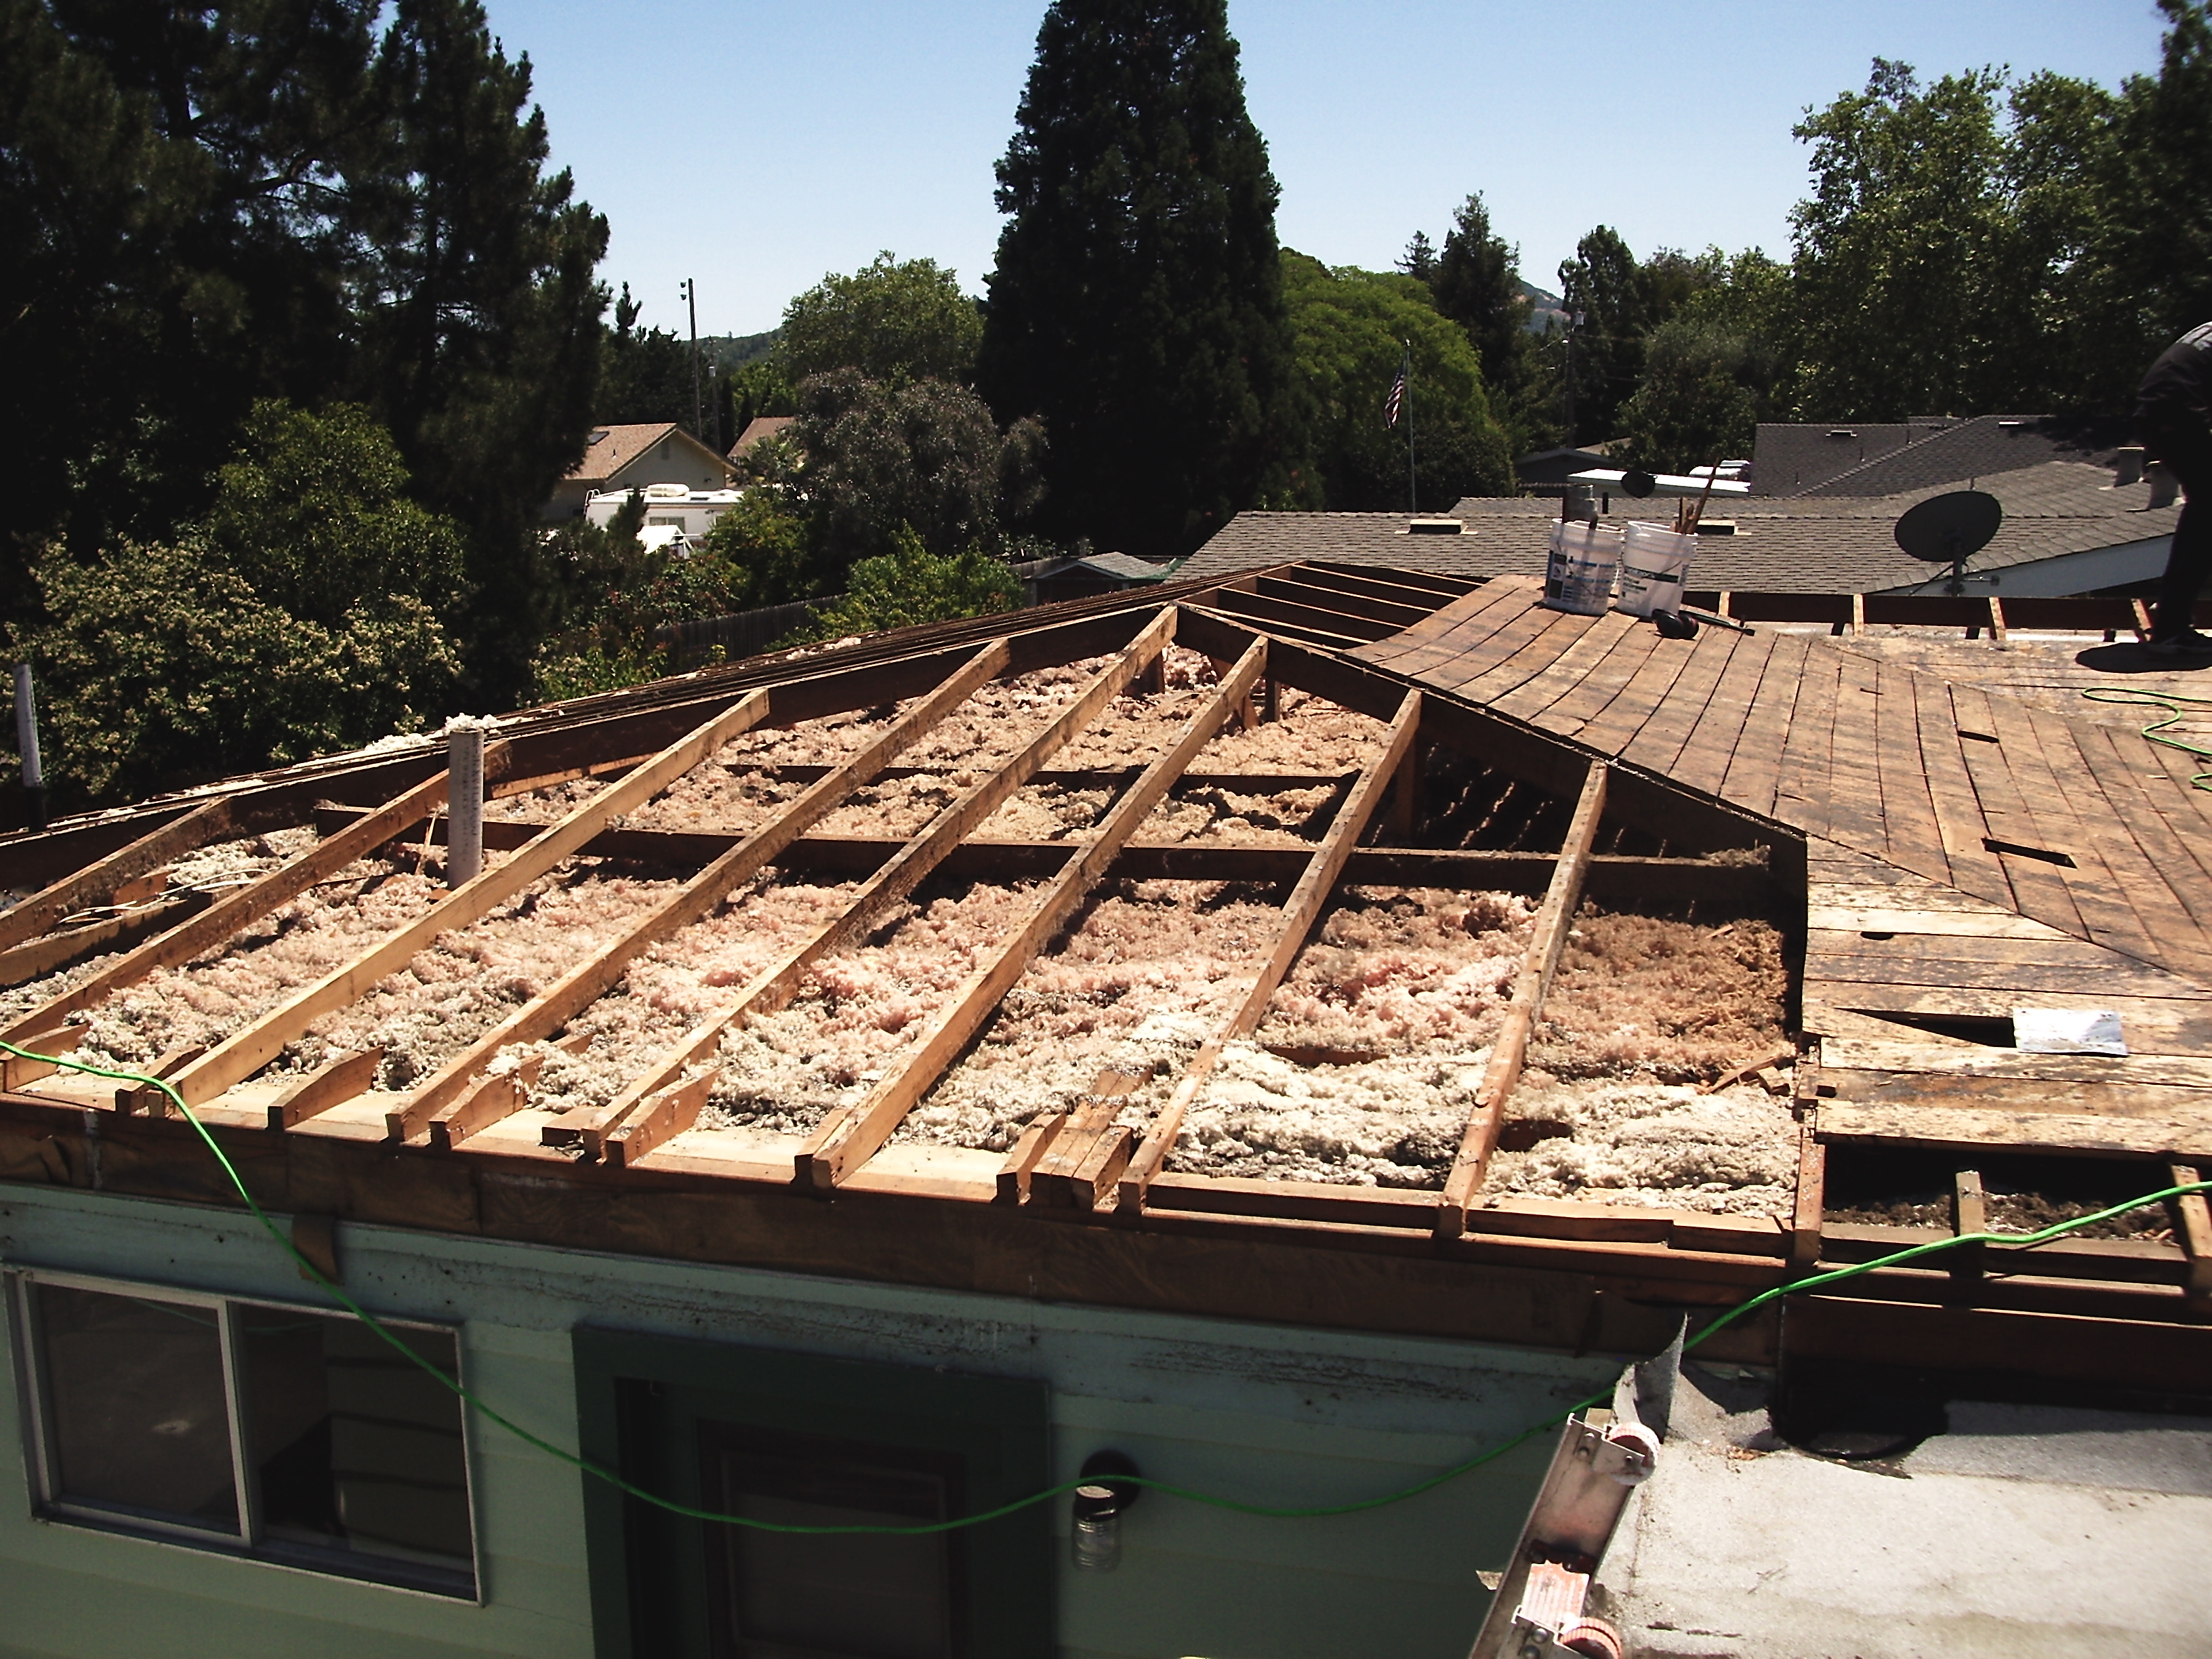 Benicia Dr Old roof system being removed